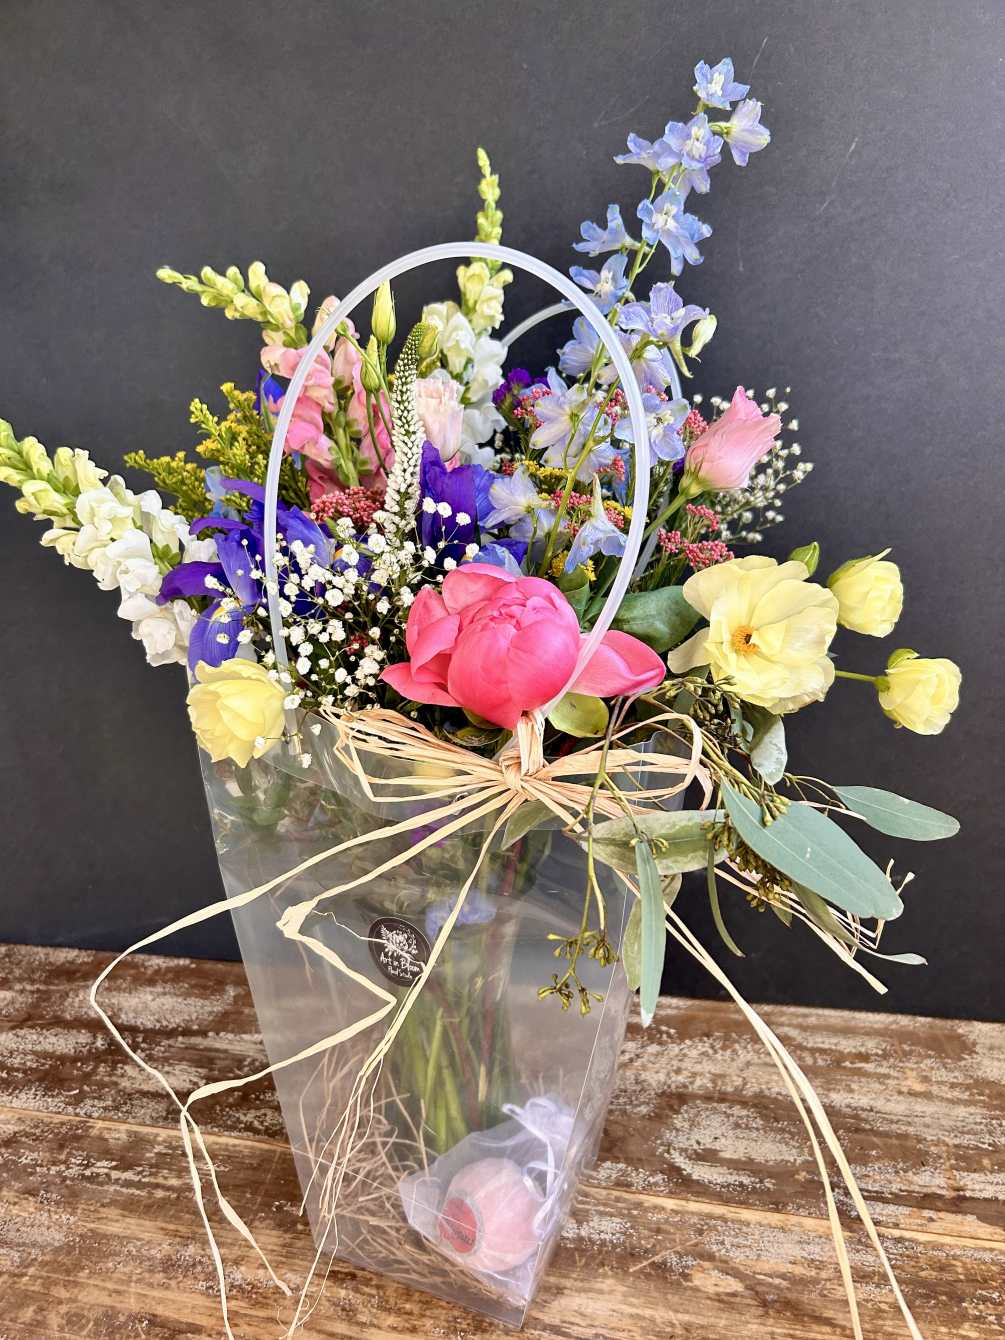 A tote bag with an assortment of fresh blooms in a vase